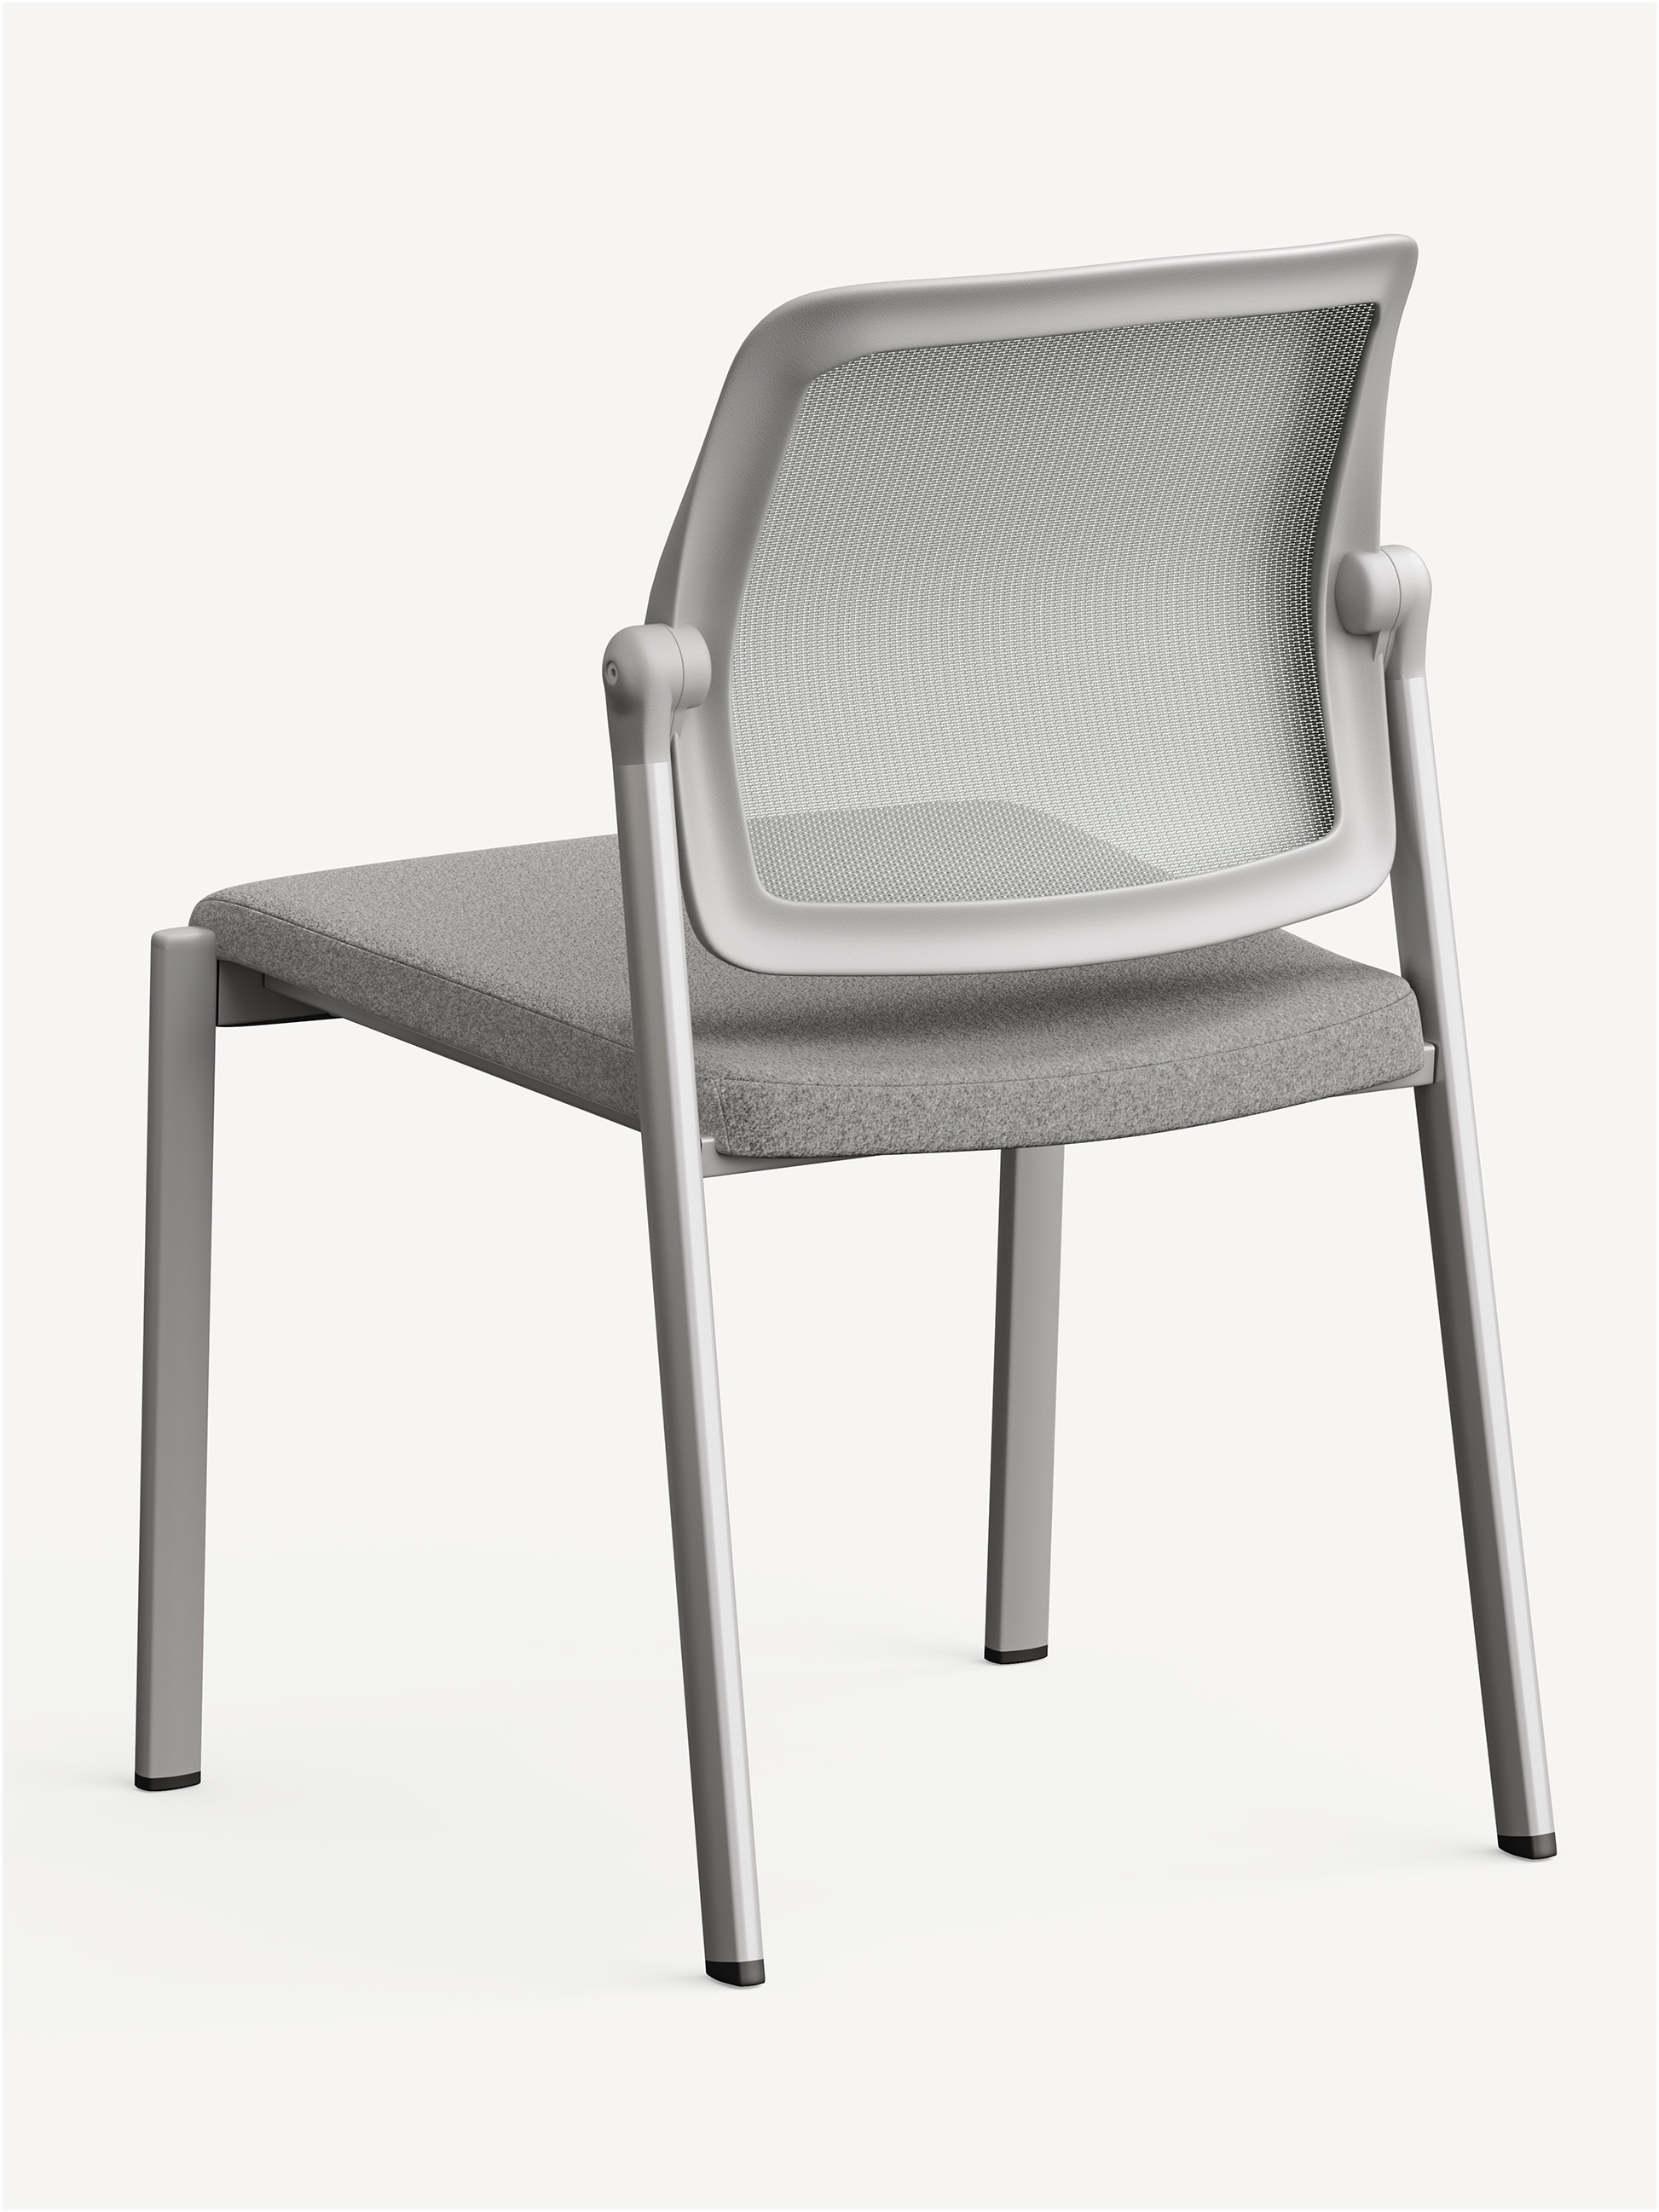 Back view of an Allsteel Acuity side chair in light grey.